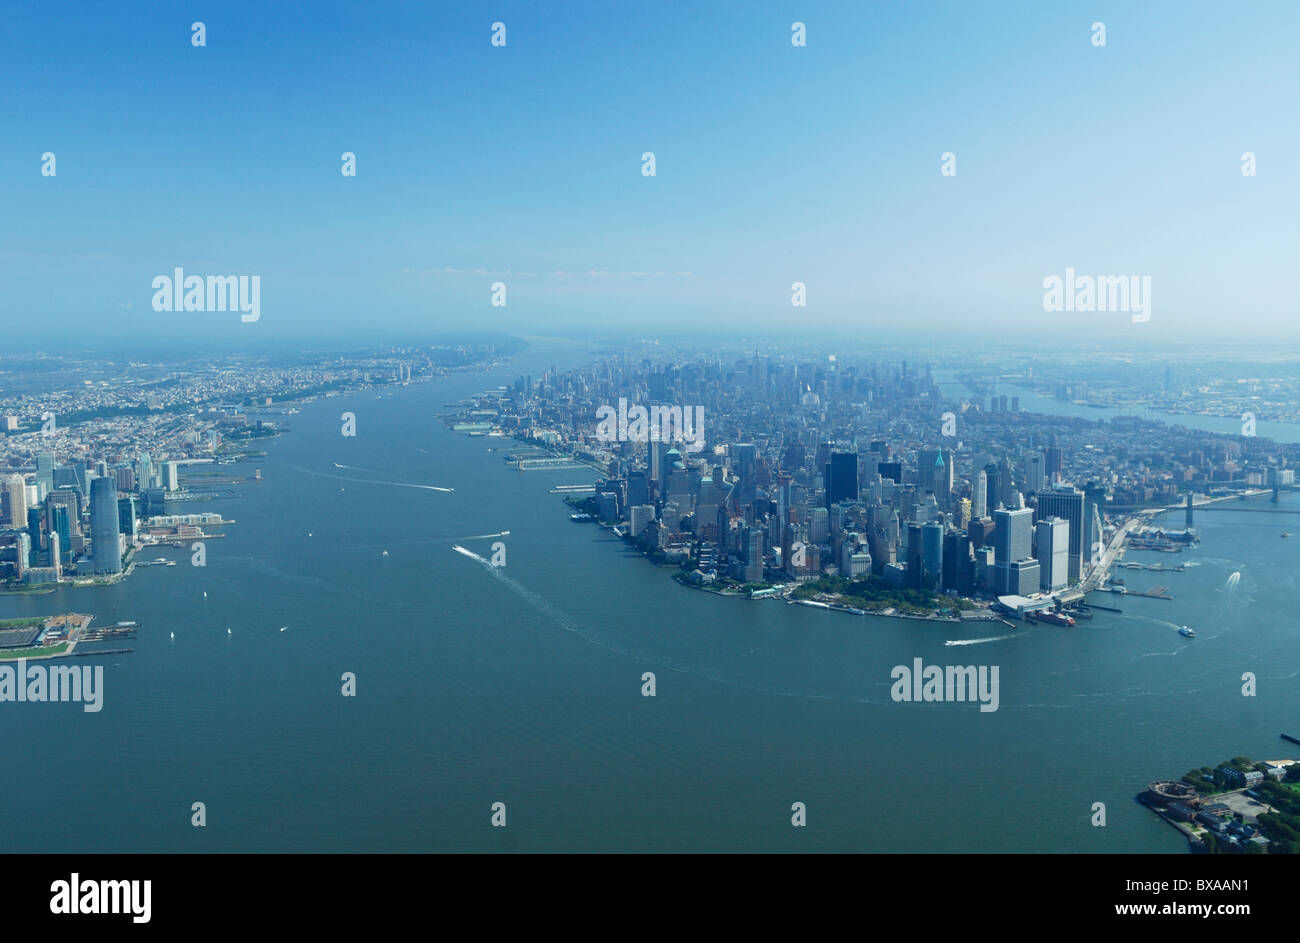 Aerial view Hudson river, Jersey city (left) and South Manhattan (right) during hot summer, New York state, North America, USA Stock Photo